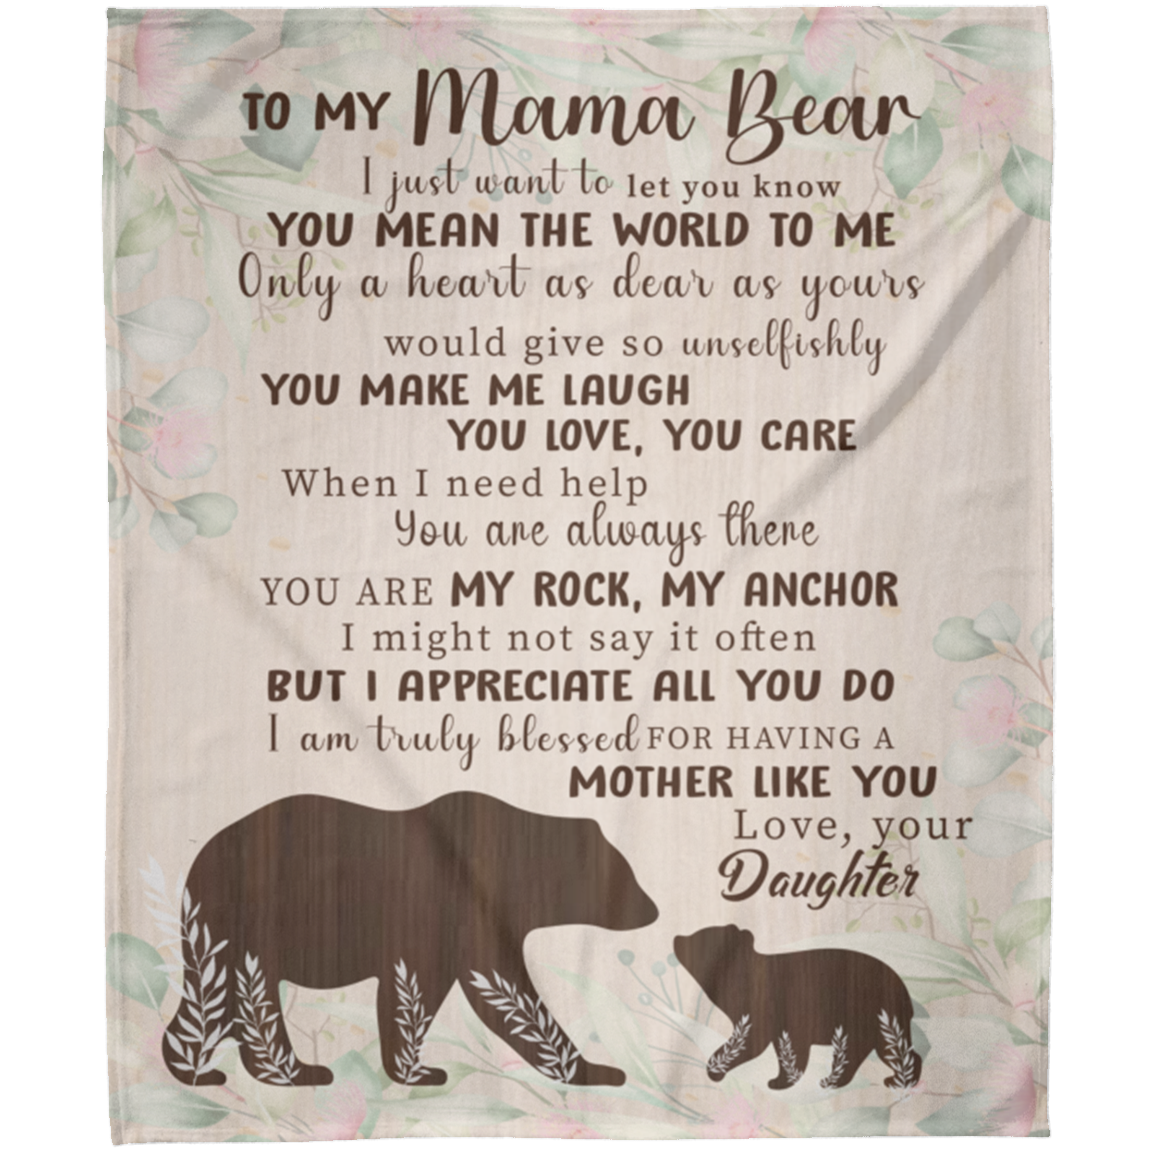 To My Mama Bear | You Mean The World To Me | Arctic Fleece Blanket 50x60